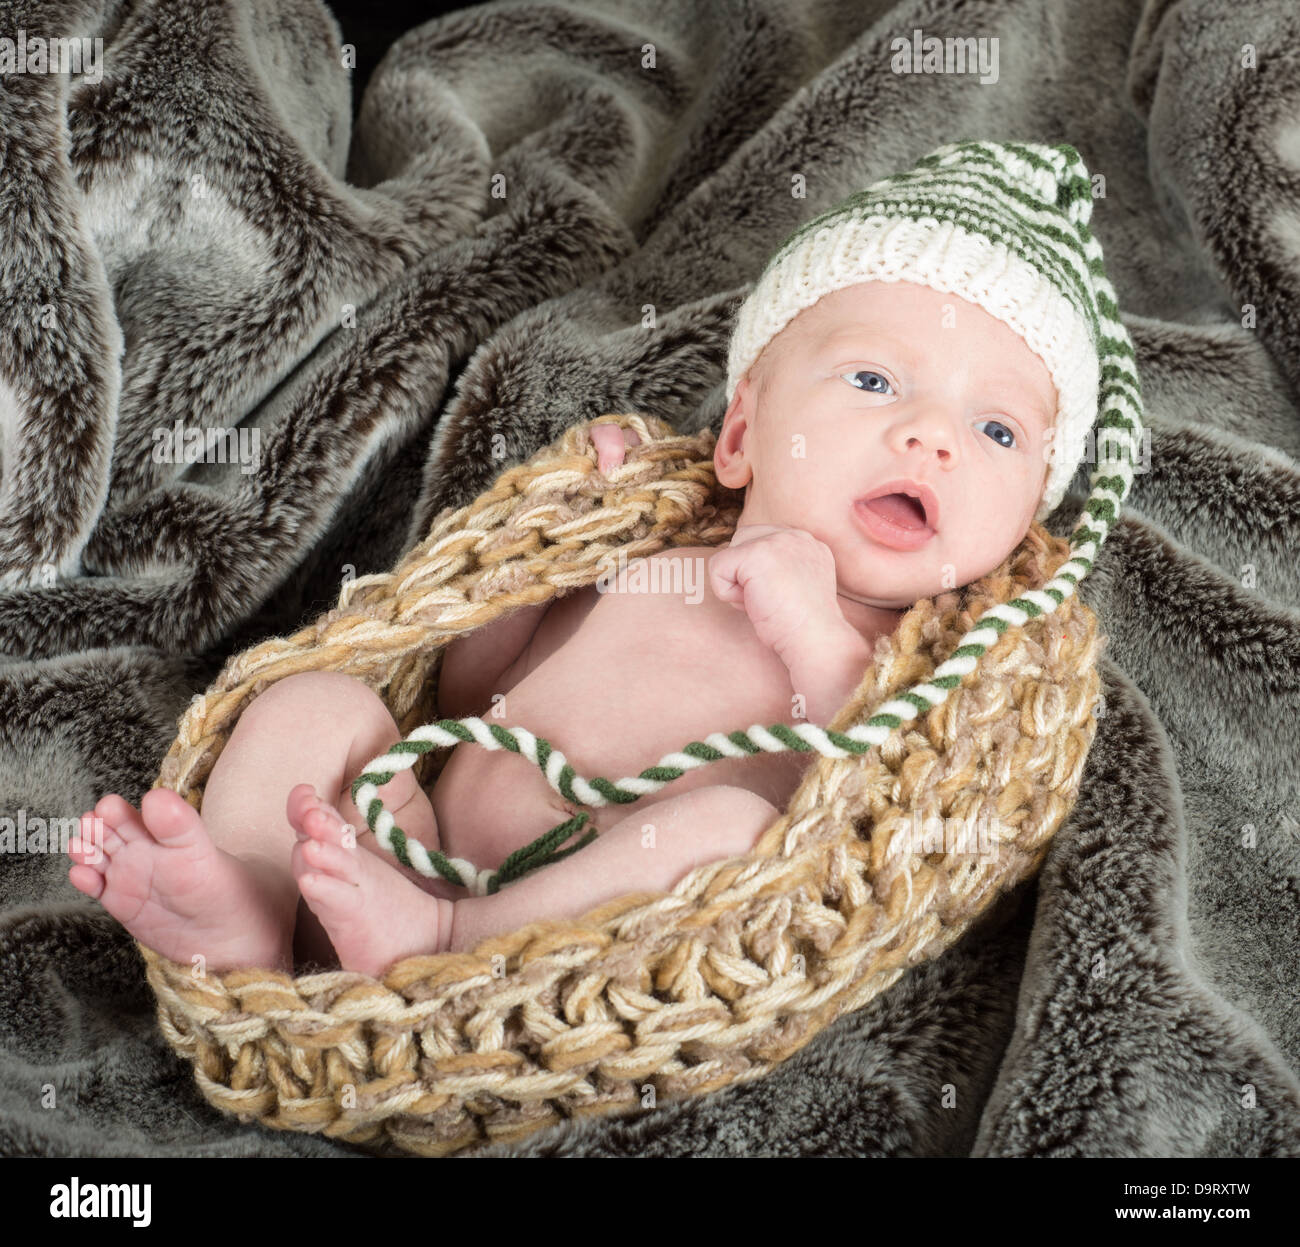 cute baby in a knit basket wearing a green and white knit hat on a fur blanket Stock Photo